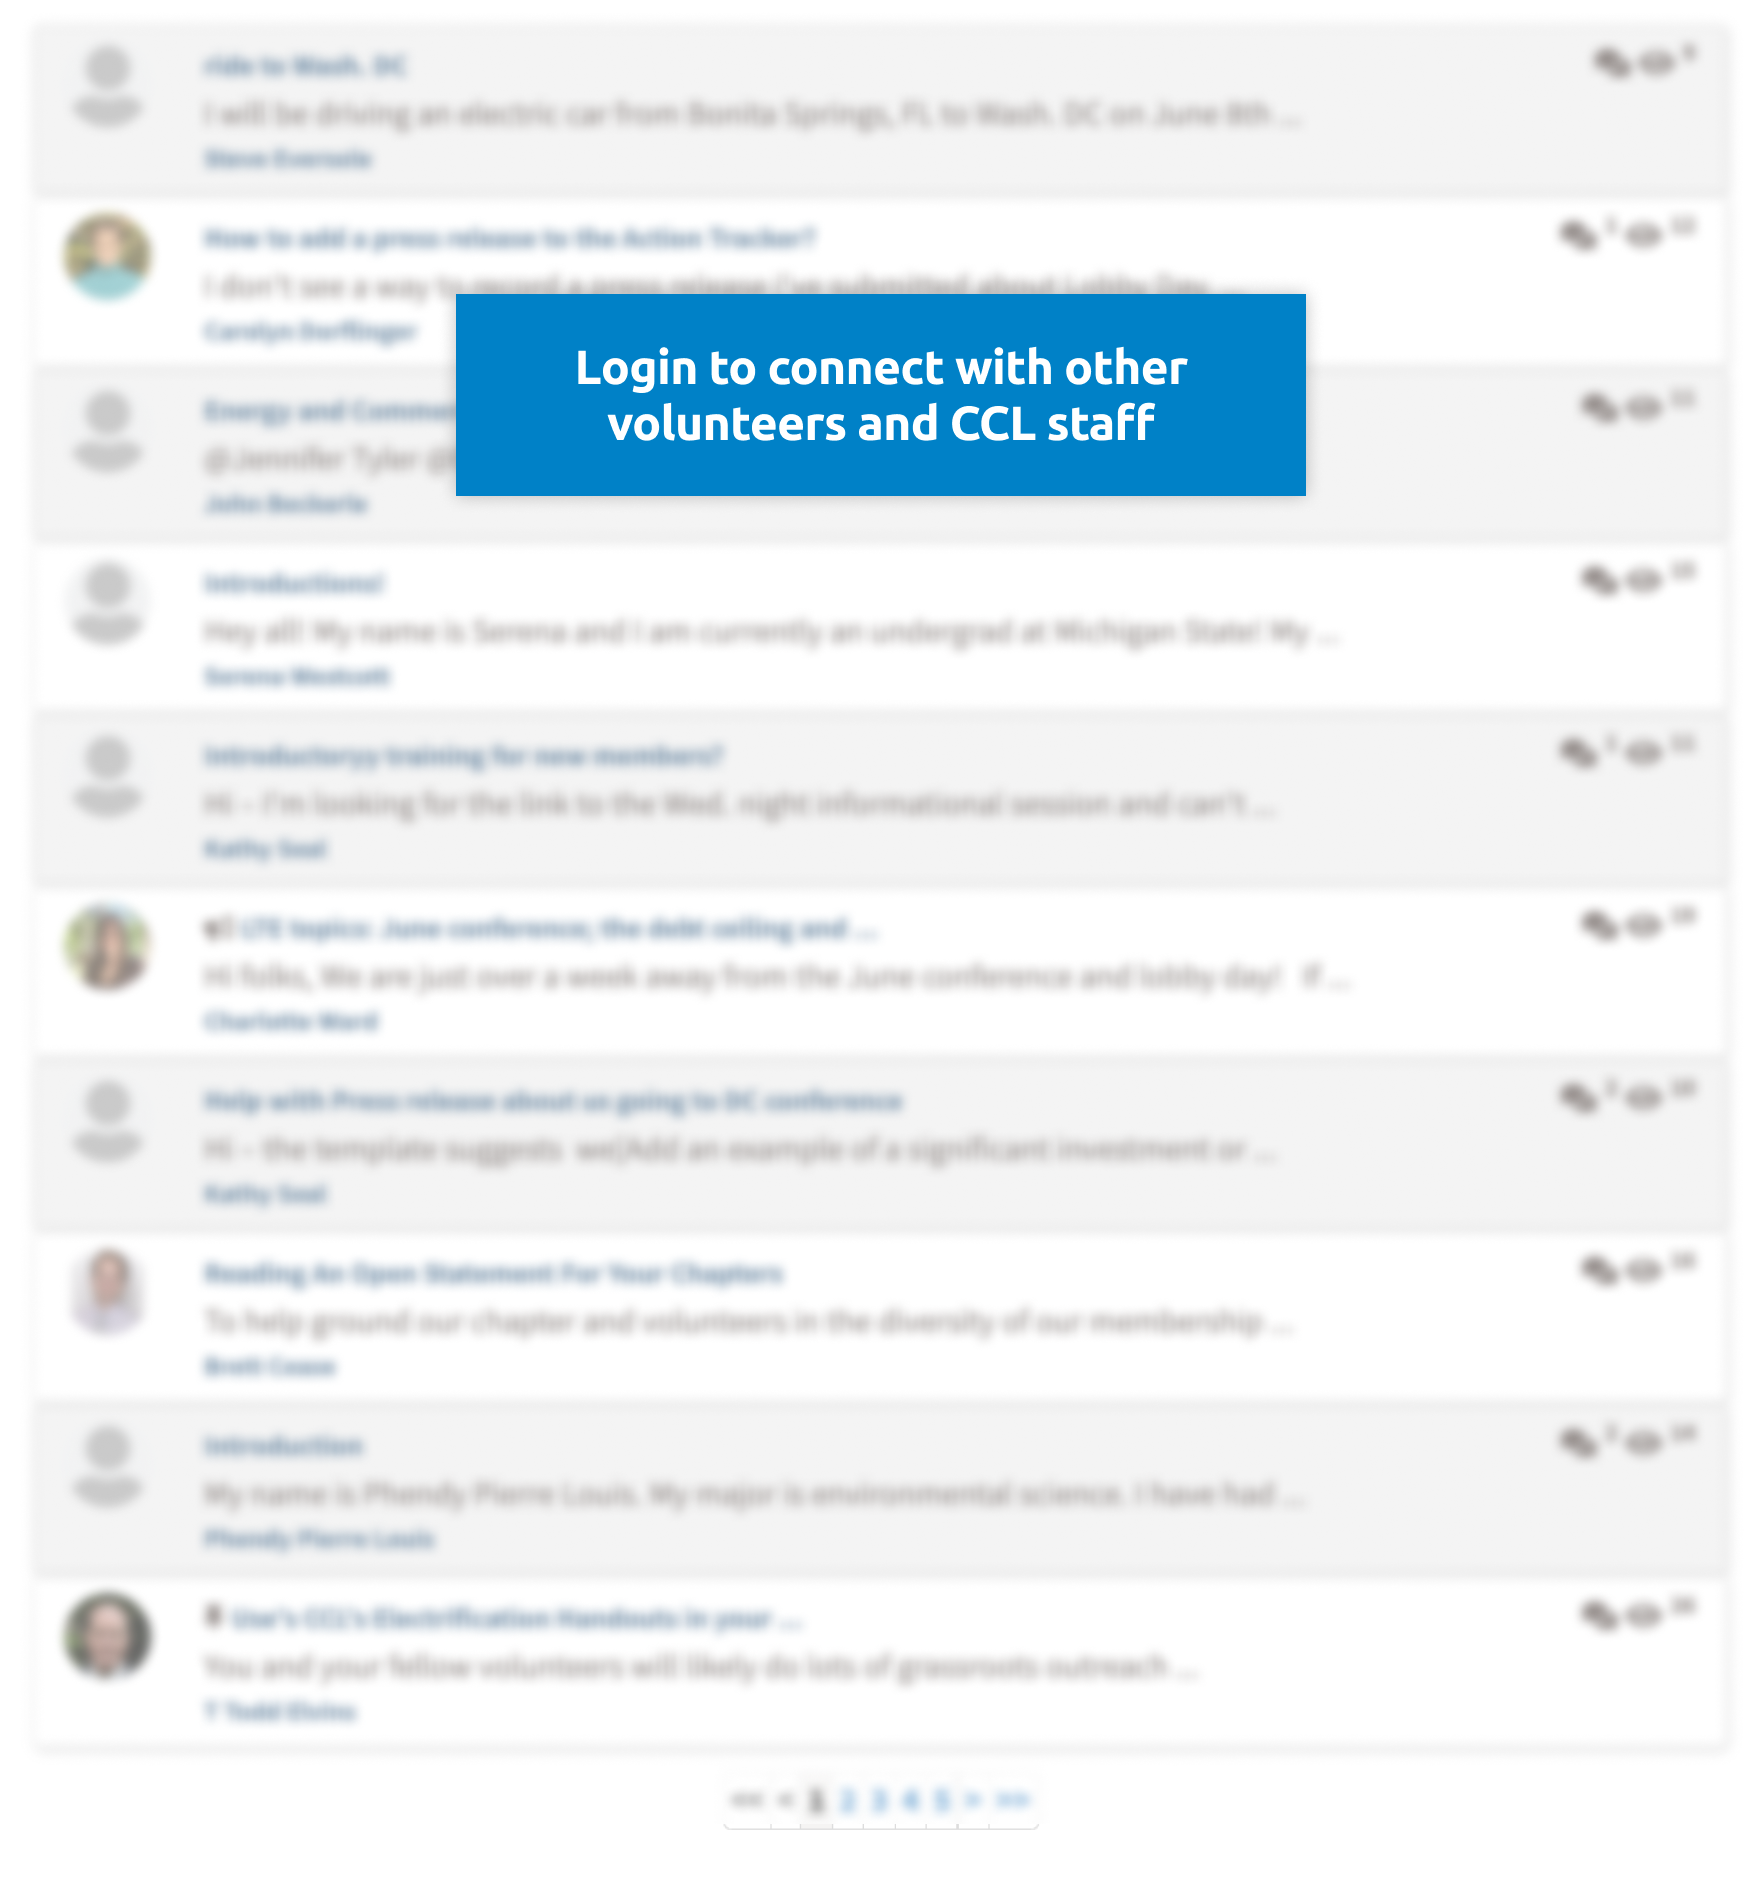 Blurred image of forums. Login to connect with other volunteers and CCL staff